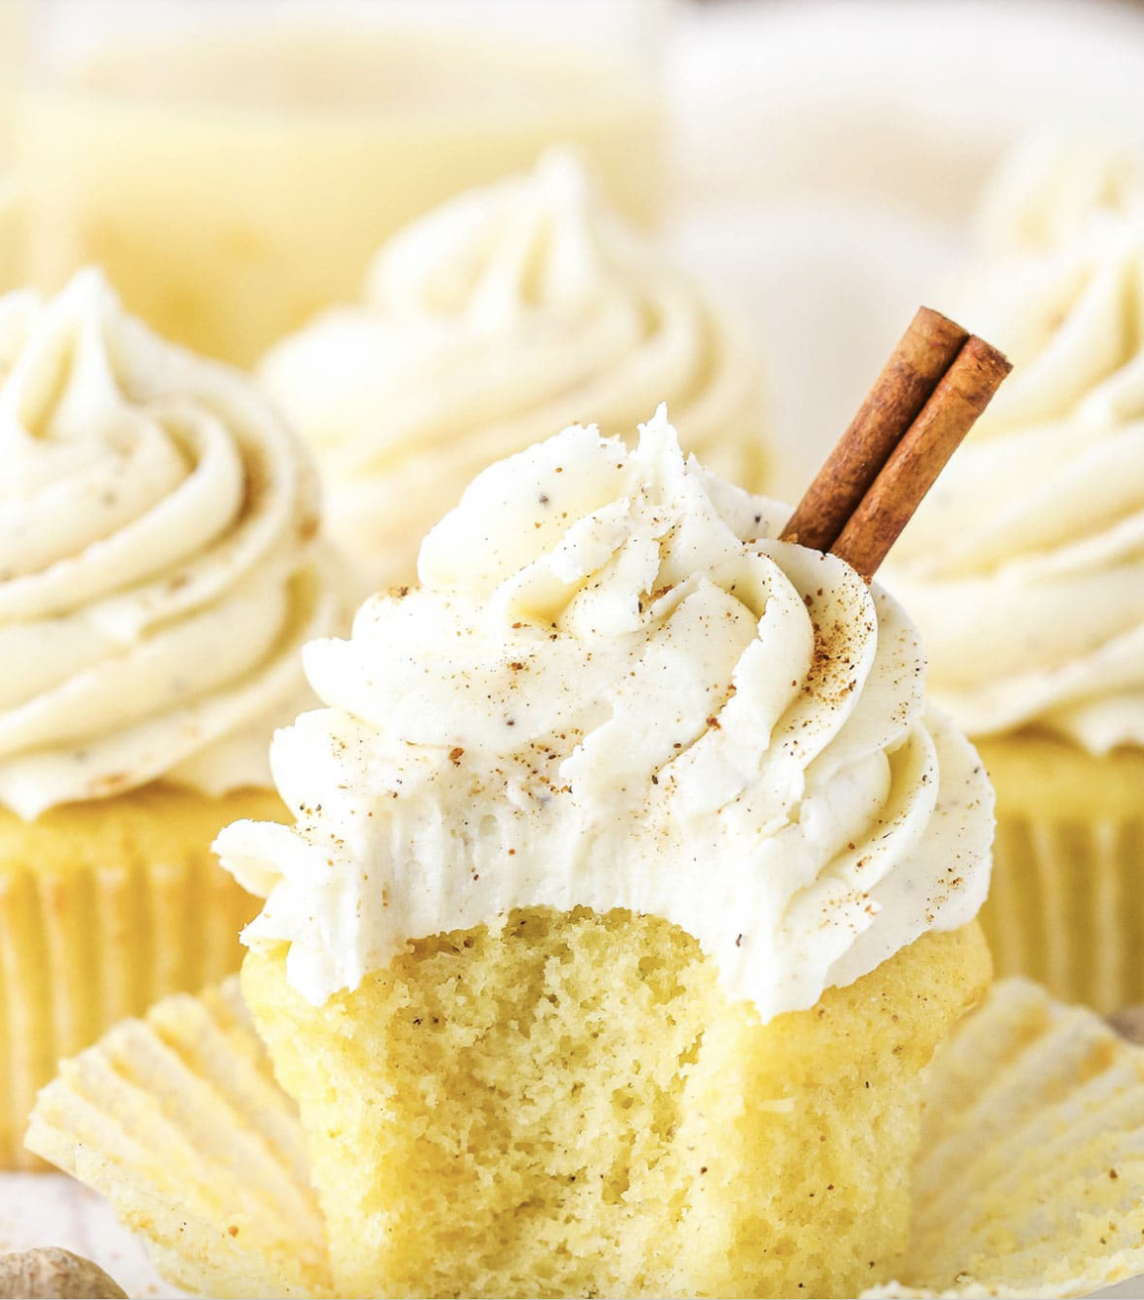 Vanilla cupcake, with white icing and a cinnamon stick as garnish.